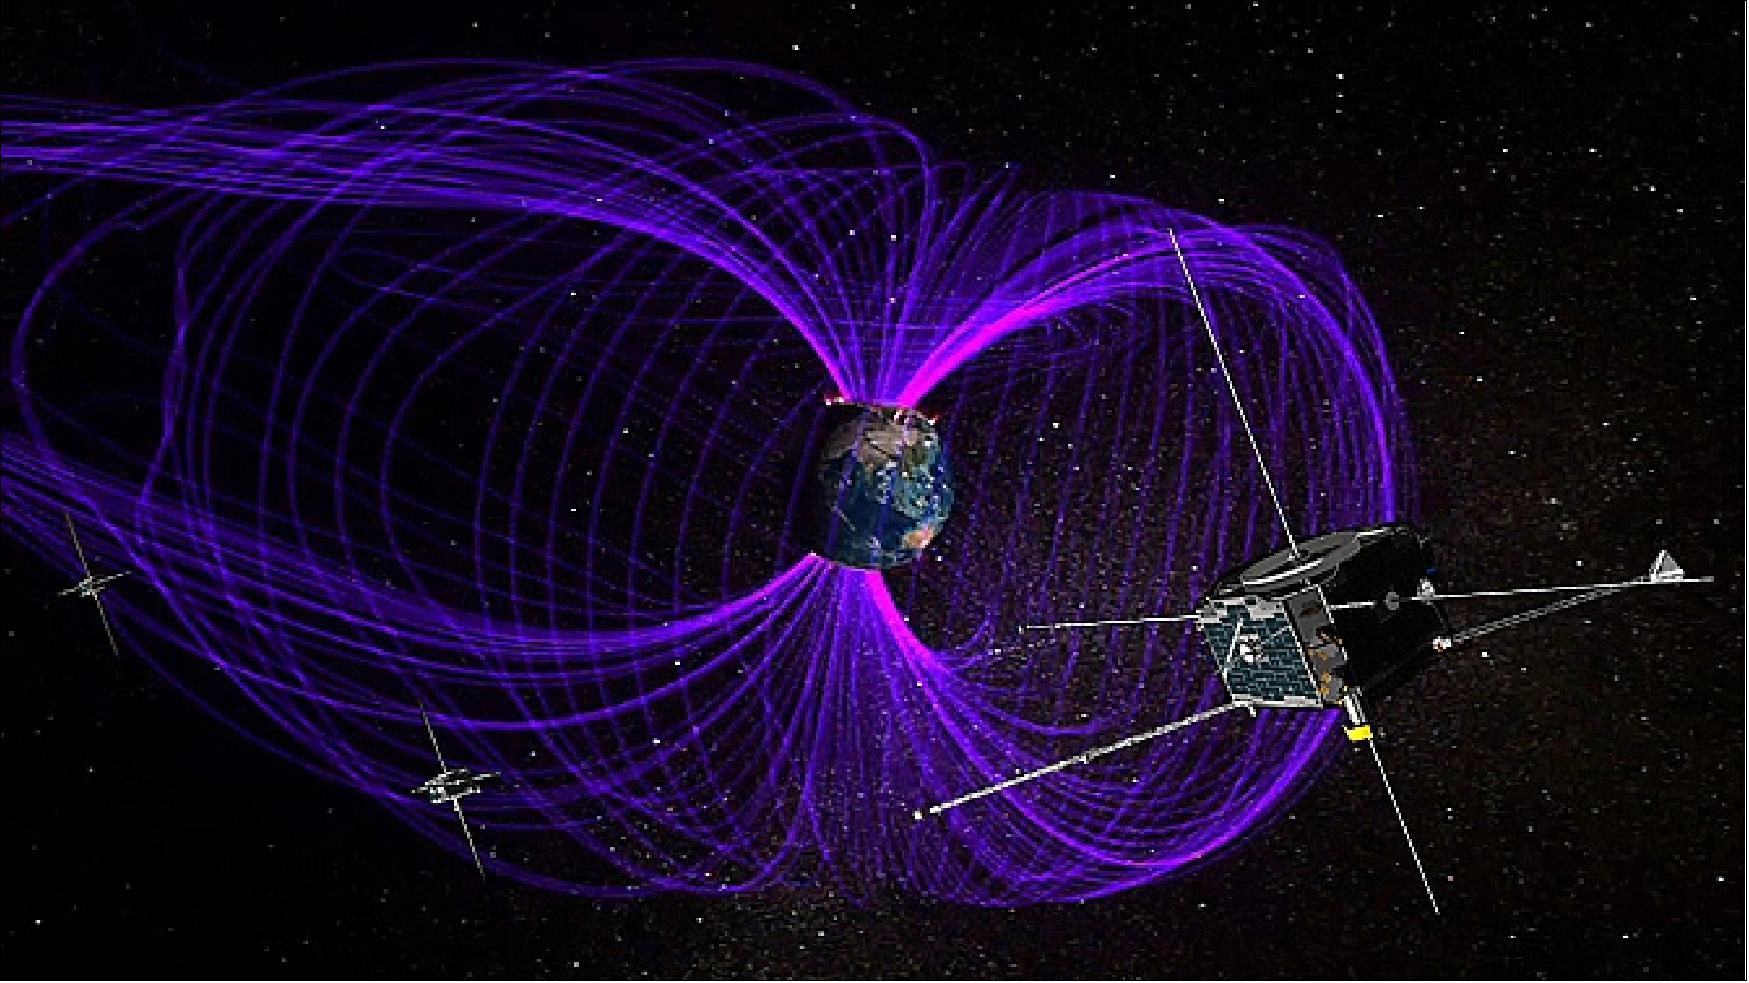 Figure 42: Artist's view of Earth's magnetosphere reconstructed from THEMIS observations (image credit: NASA, Ref. 44)